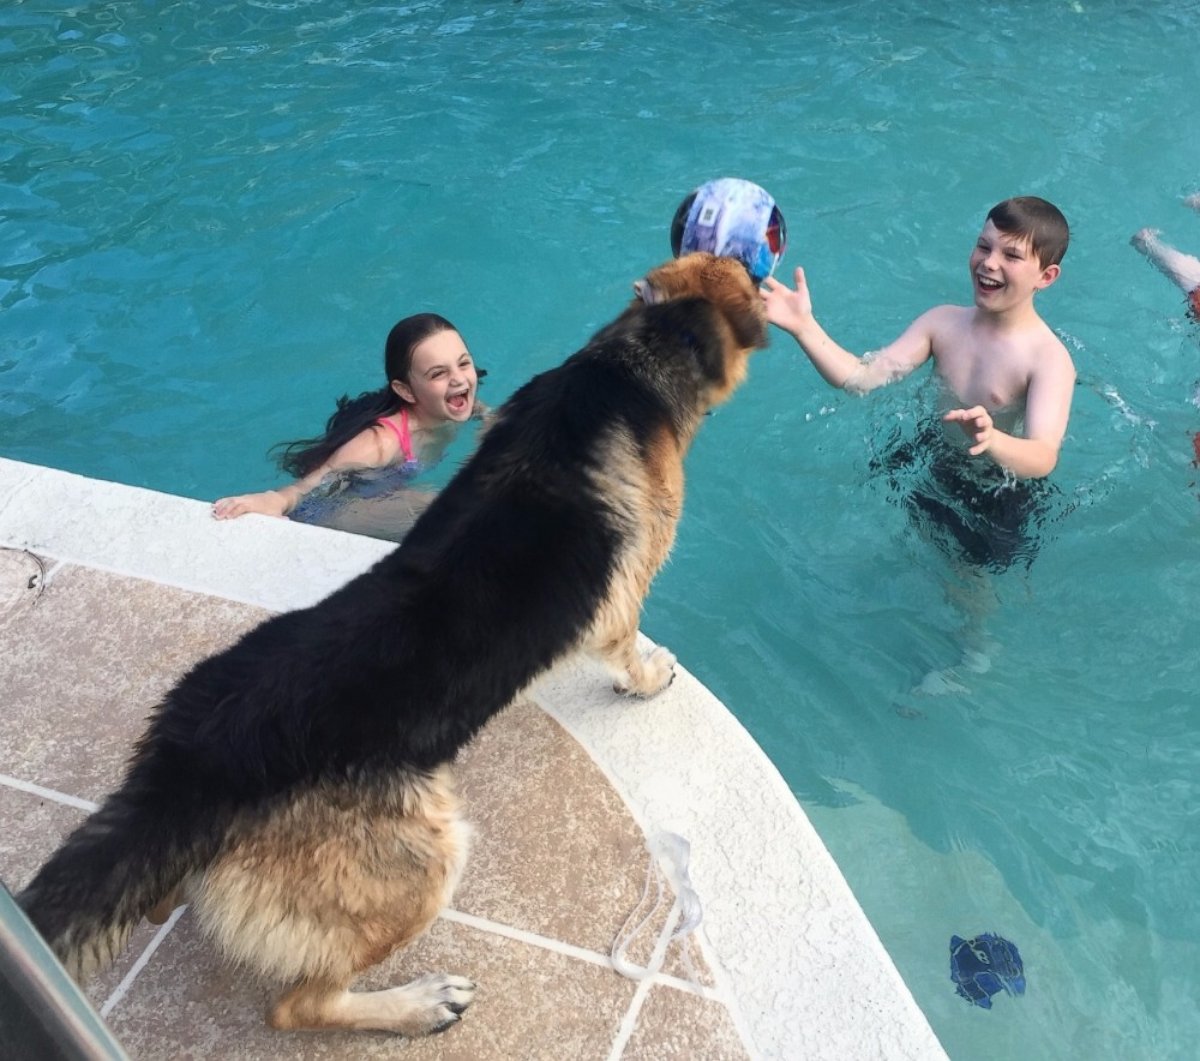 PHOTO: Molly plays in the DeLucas? pool while Haus watches.